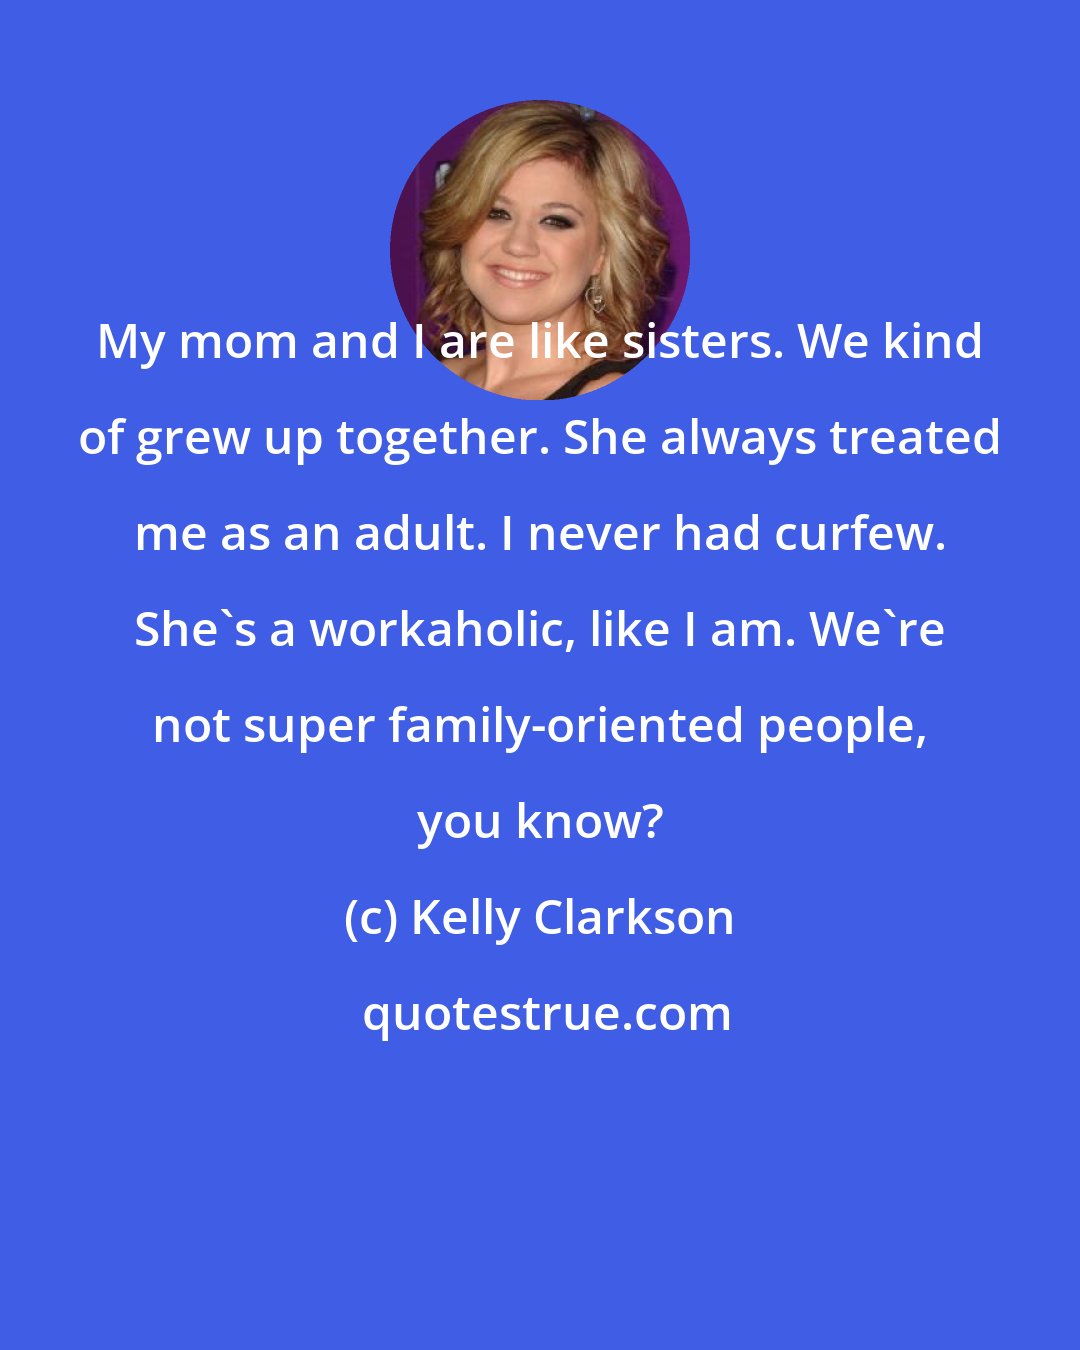 Kelly Clarkson: My mom and I are like sisters. We kind of grew up together. She always treated me as an adult. I never had curfew. She's a workaholic, like I am. We're not super family-oriented people, you know?